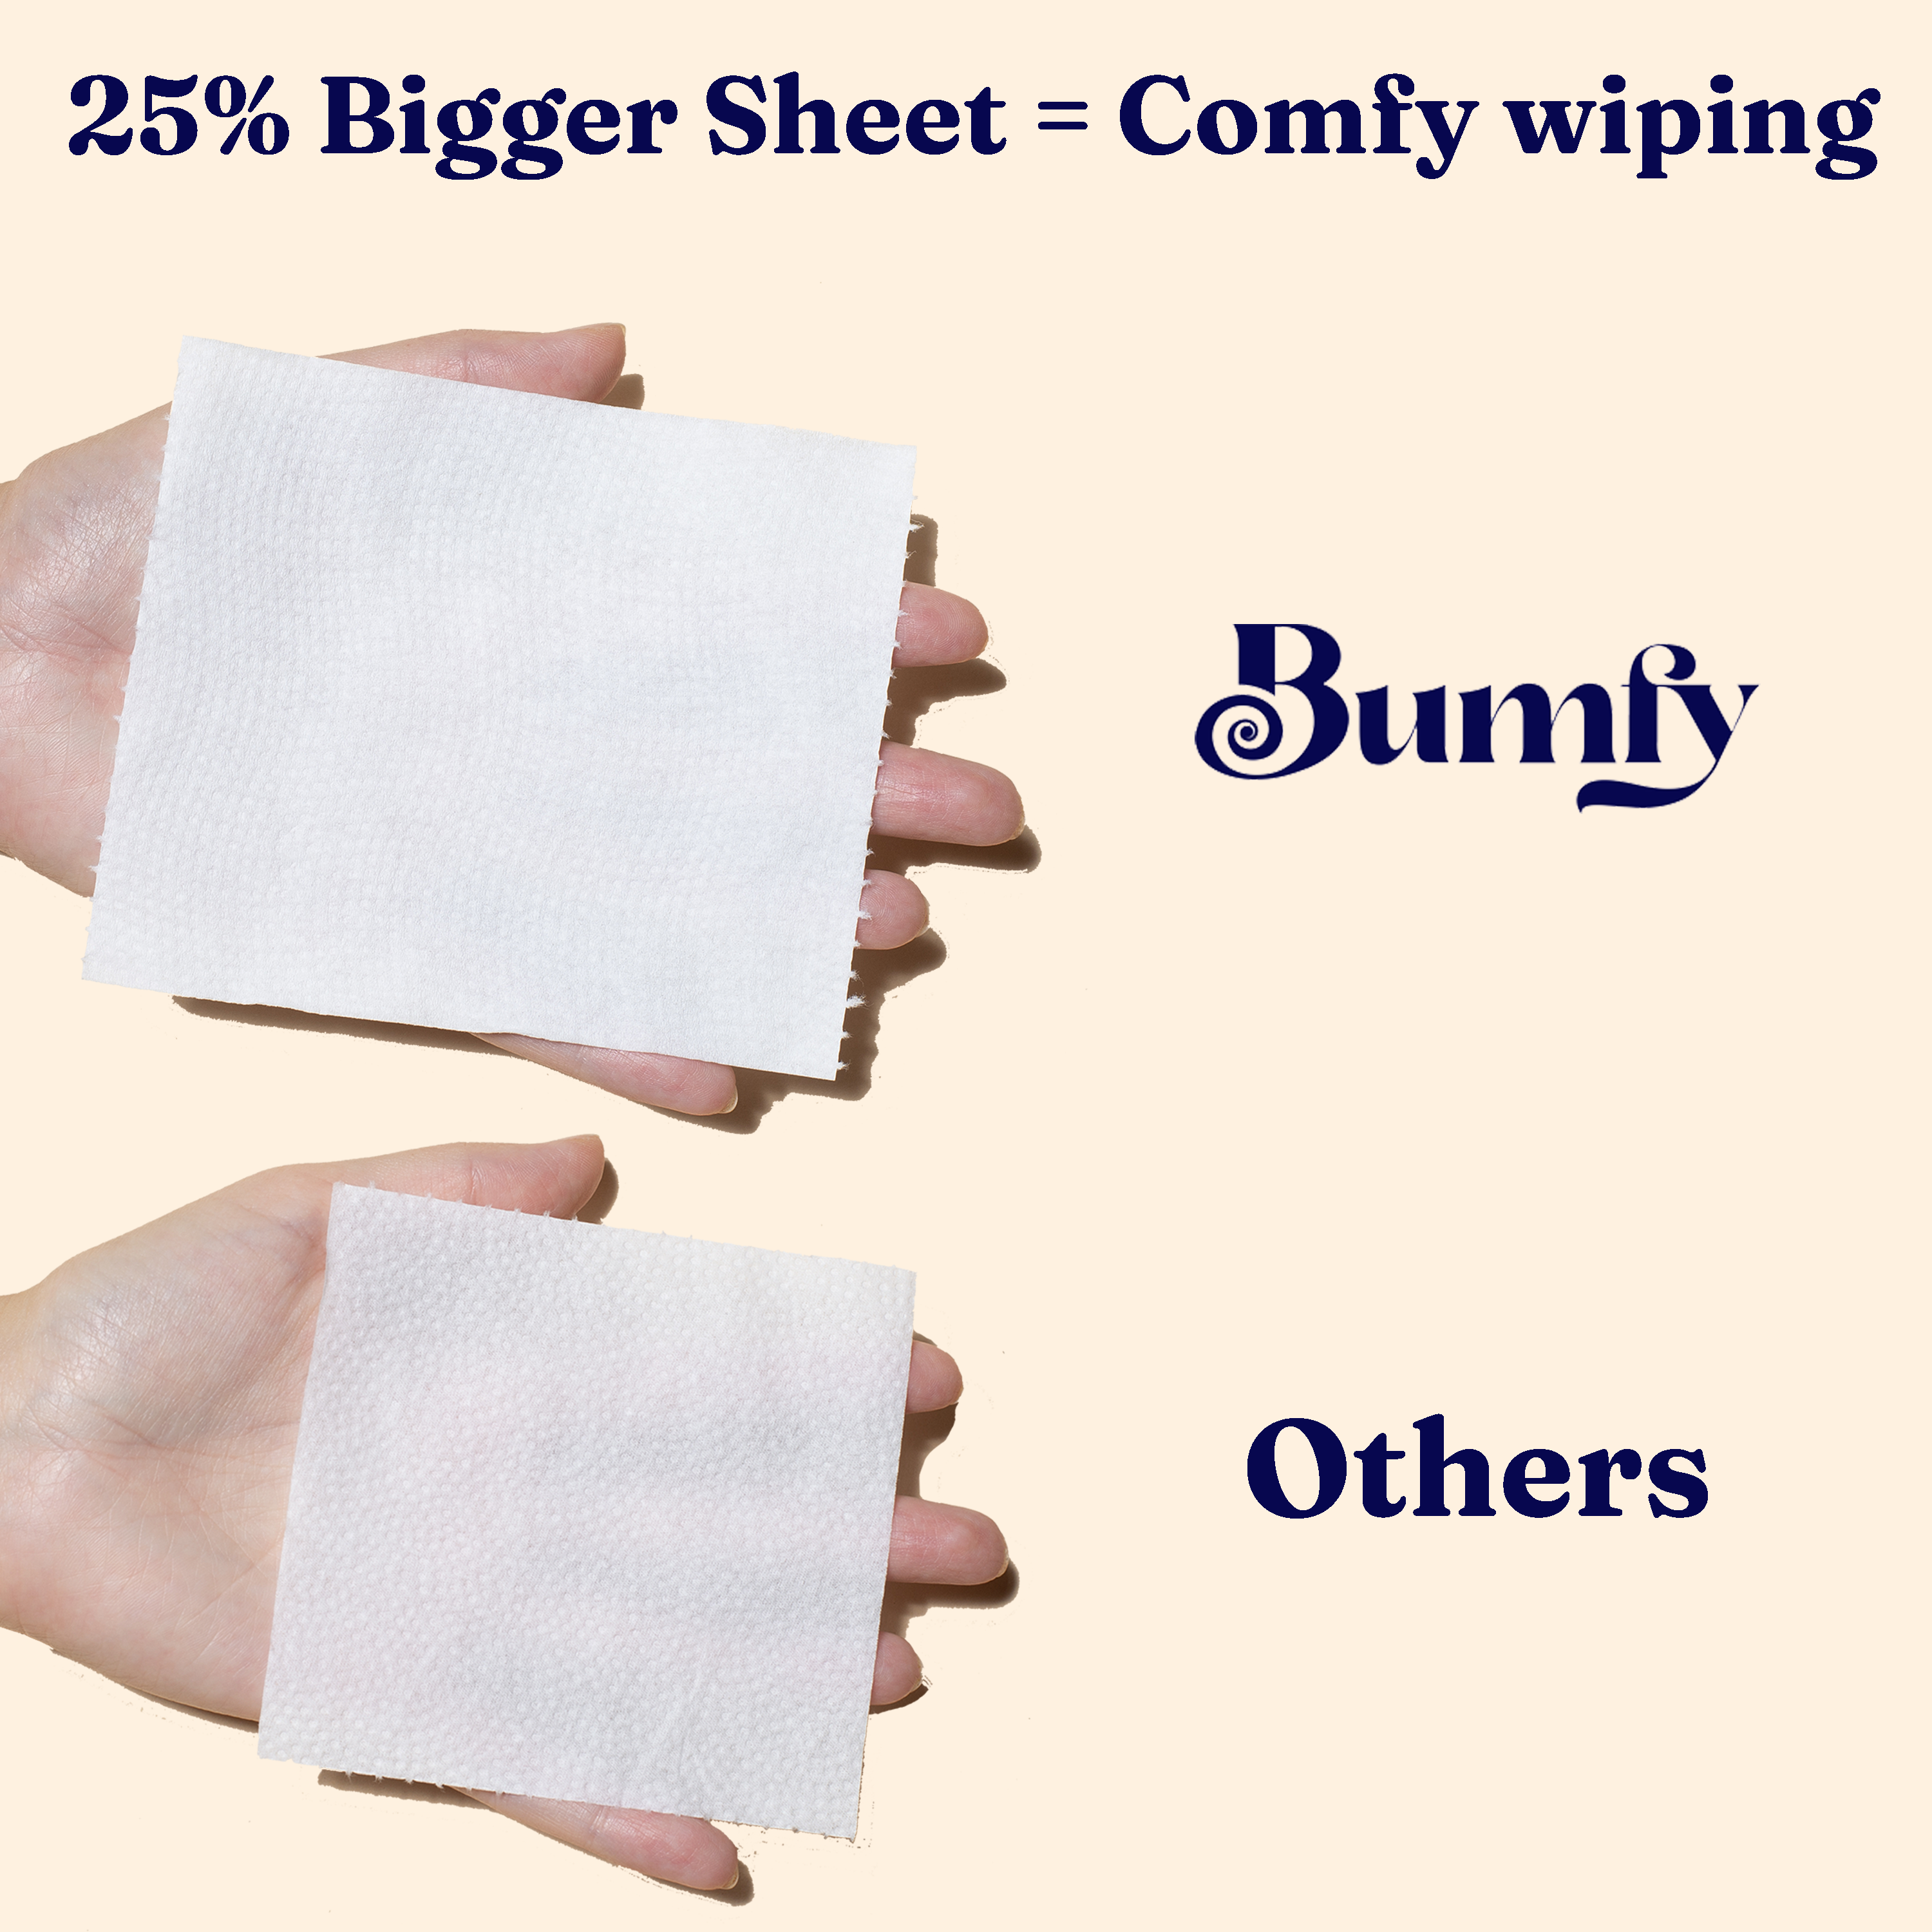 Bumfy Bamboo Toilet Paper - Product Images